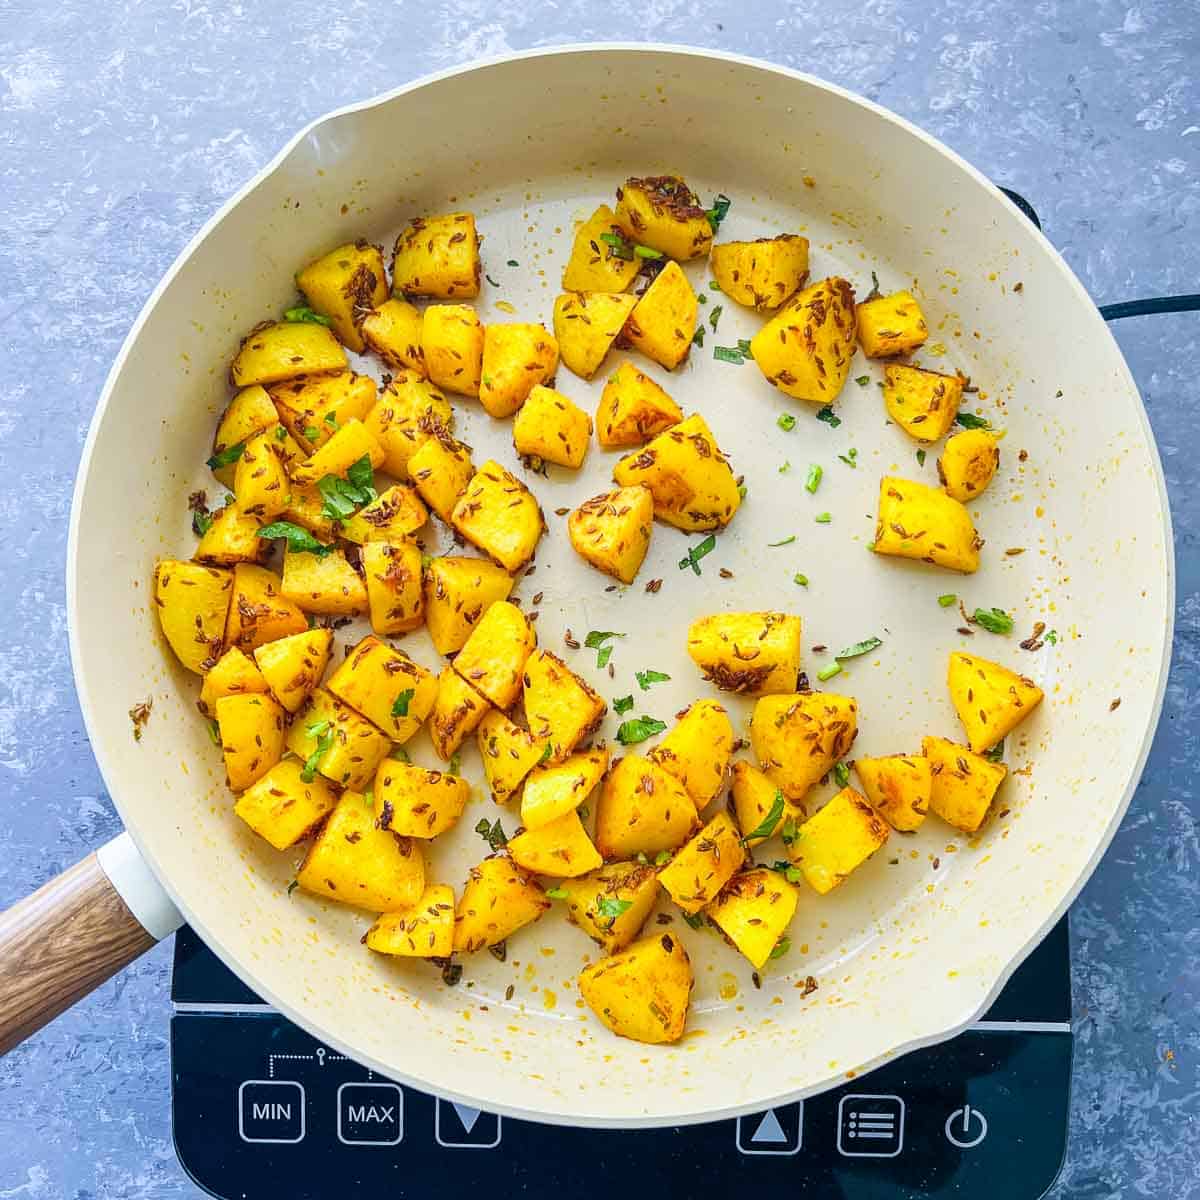 Potatoes cooked in frying pan.